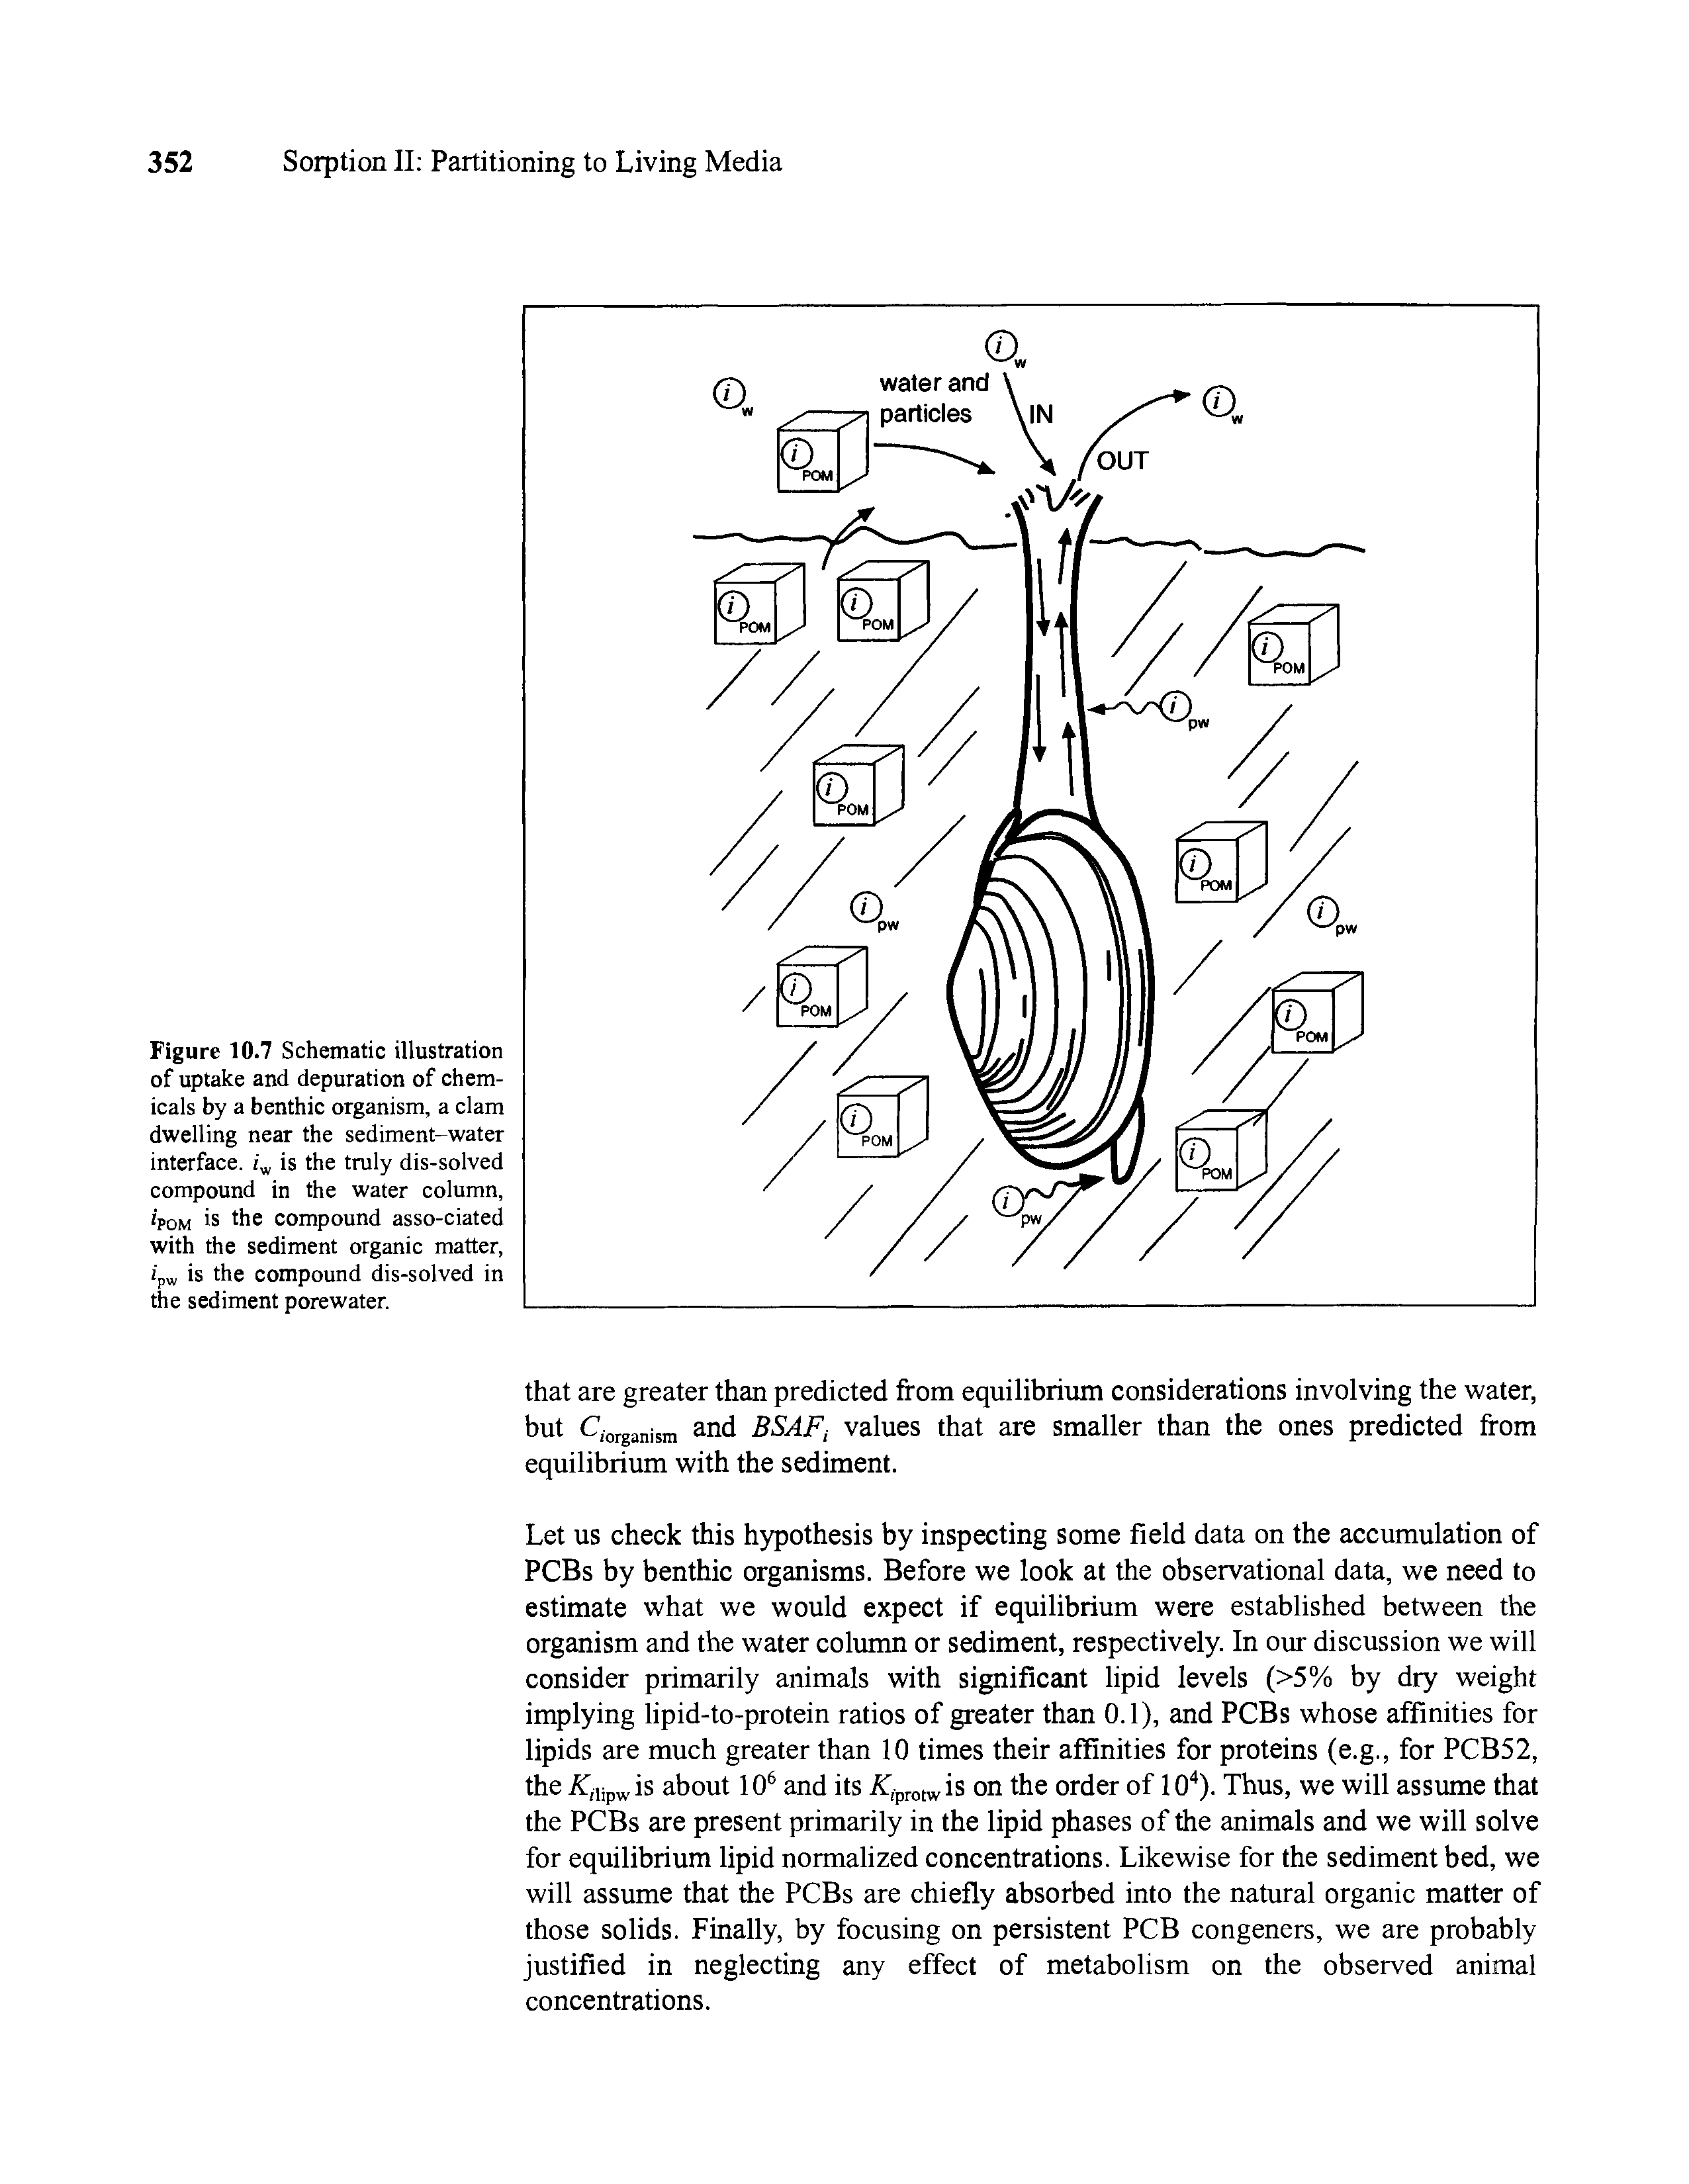 Figure 10.7 Schematic illustration of uptake and depuration of chemicals by a benthic organism, a clam dwelling near the sediment-water interface. iw is the truly dis-solved compound in the water column, ipom is the compound asso-ciated with the sediment organic matter, ipw is the compound dis-solved in the sediment porewater.